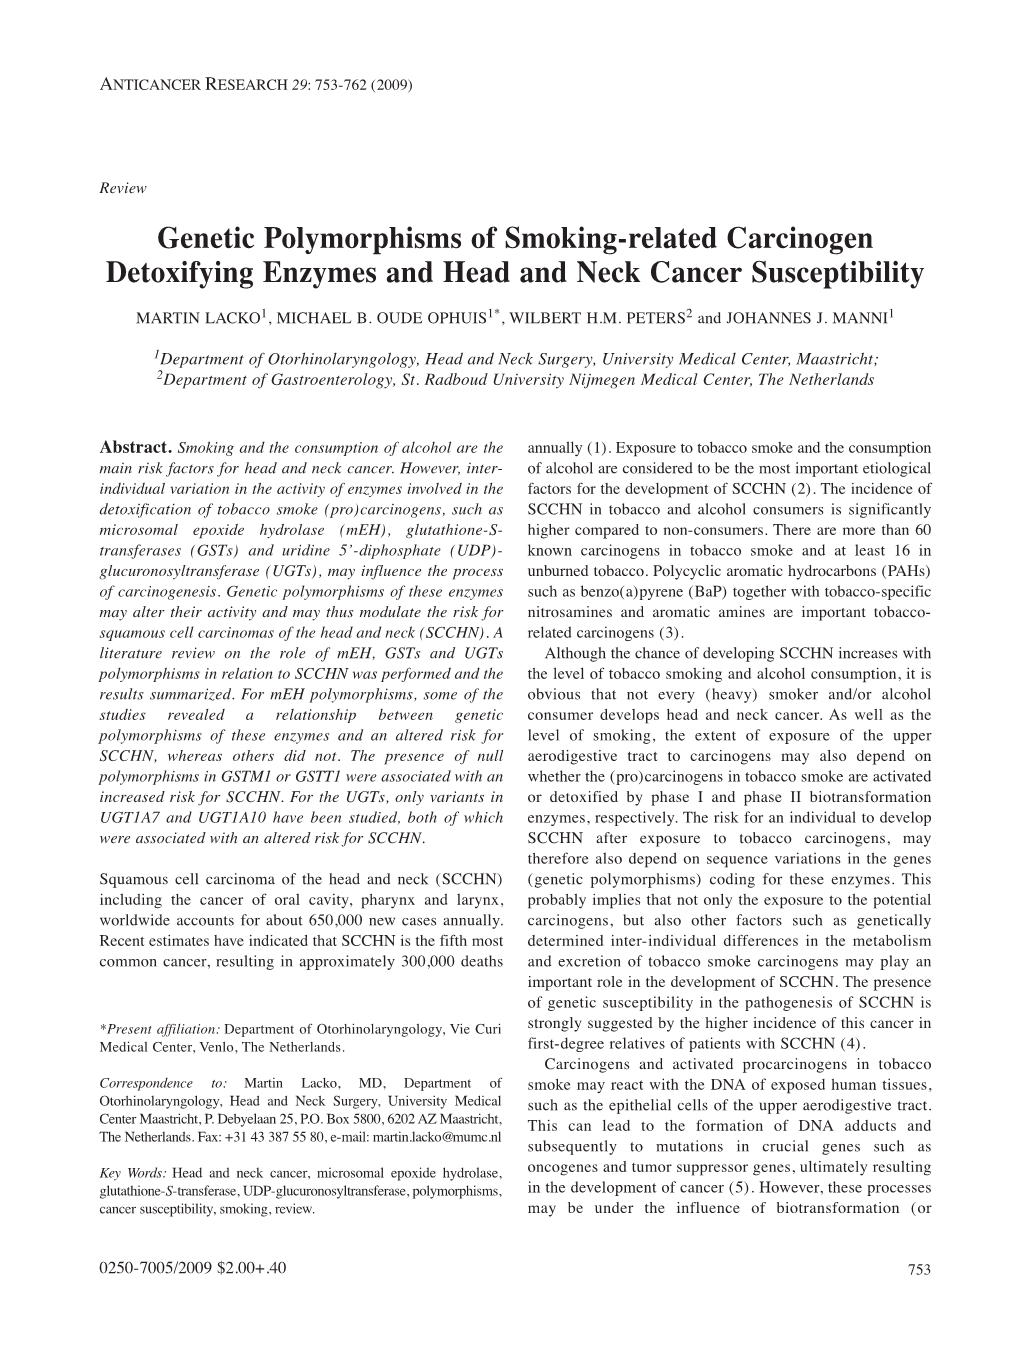 Genetic Polymorphisms of Smoking-Related Carcinogen Detoxifying Enzymes and Head and Neck Cancer Susceptibility